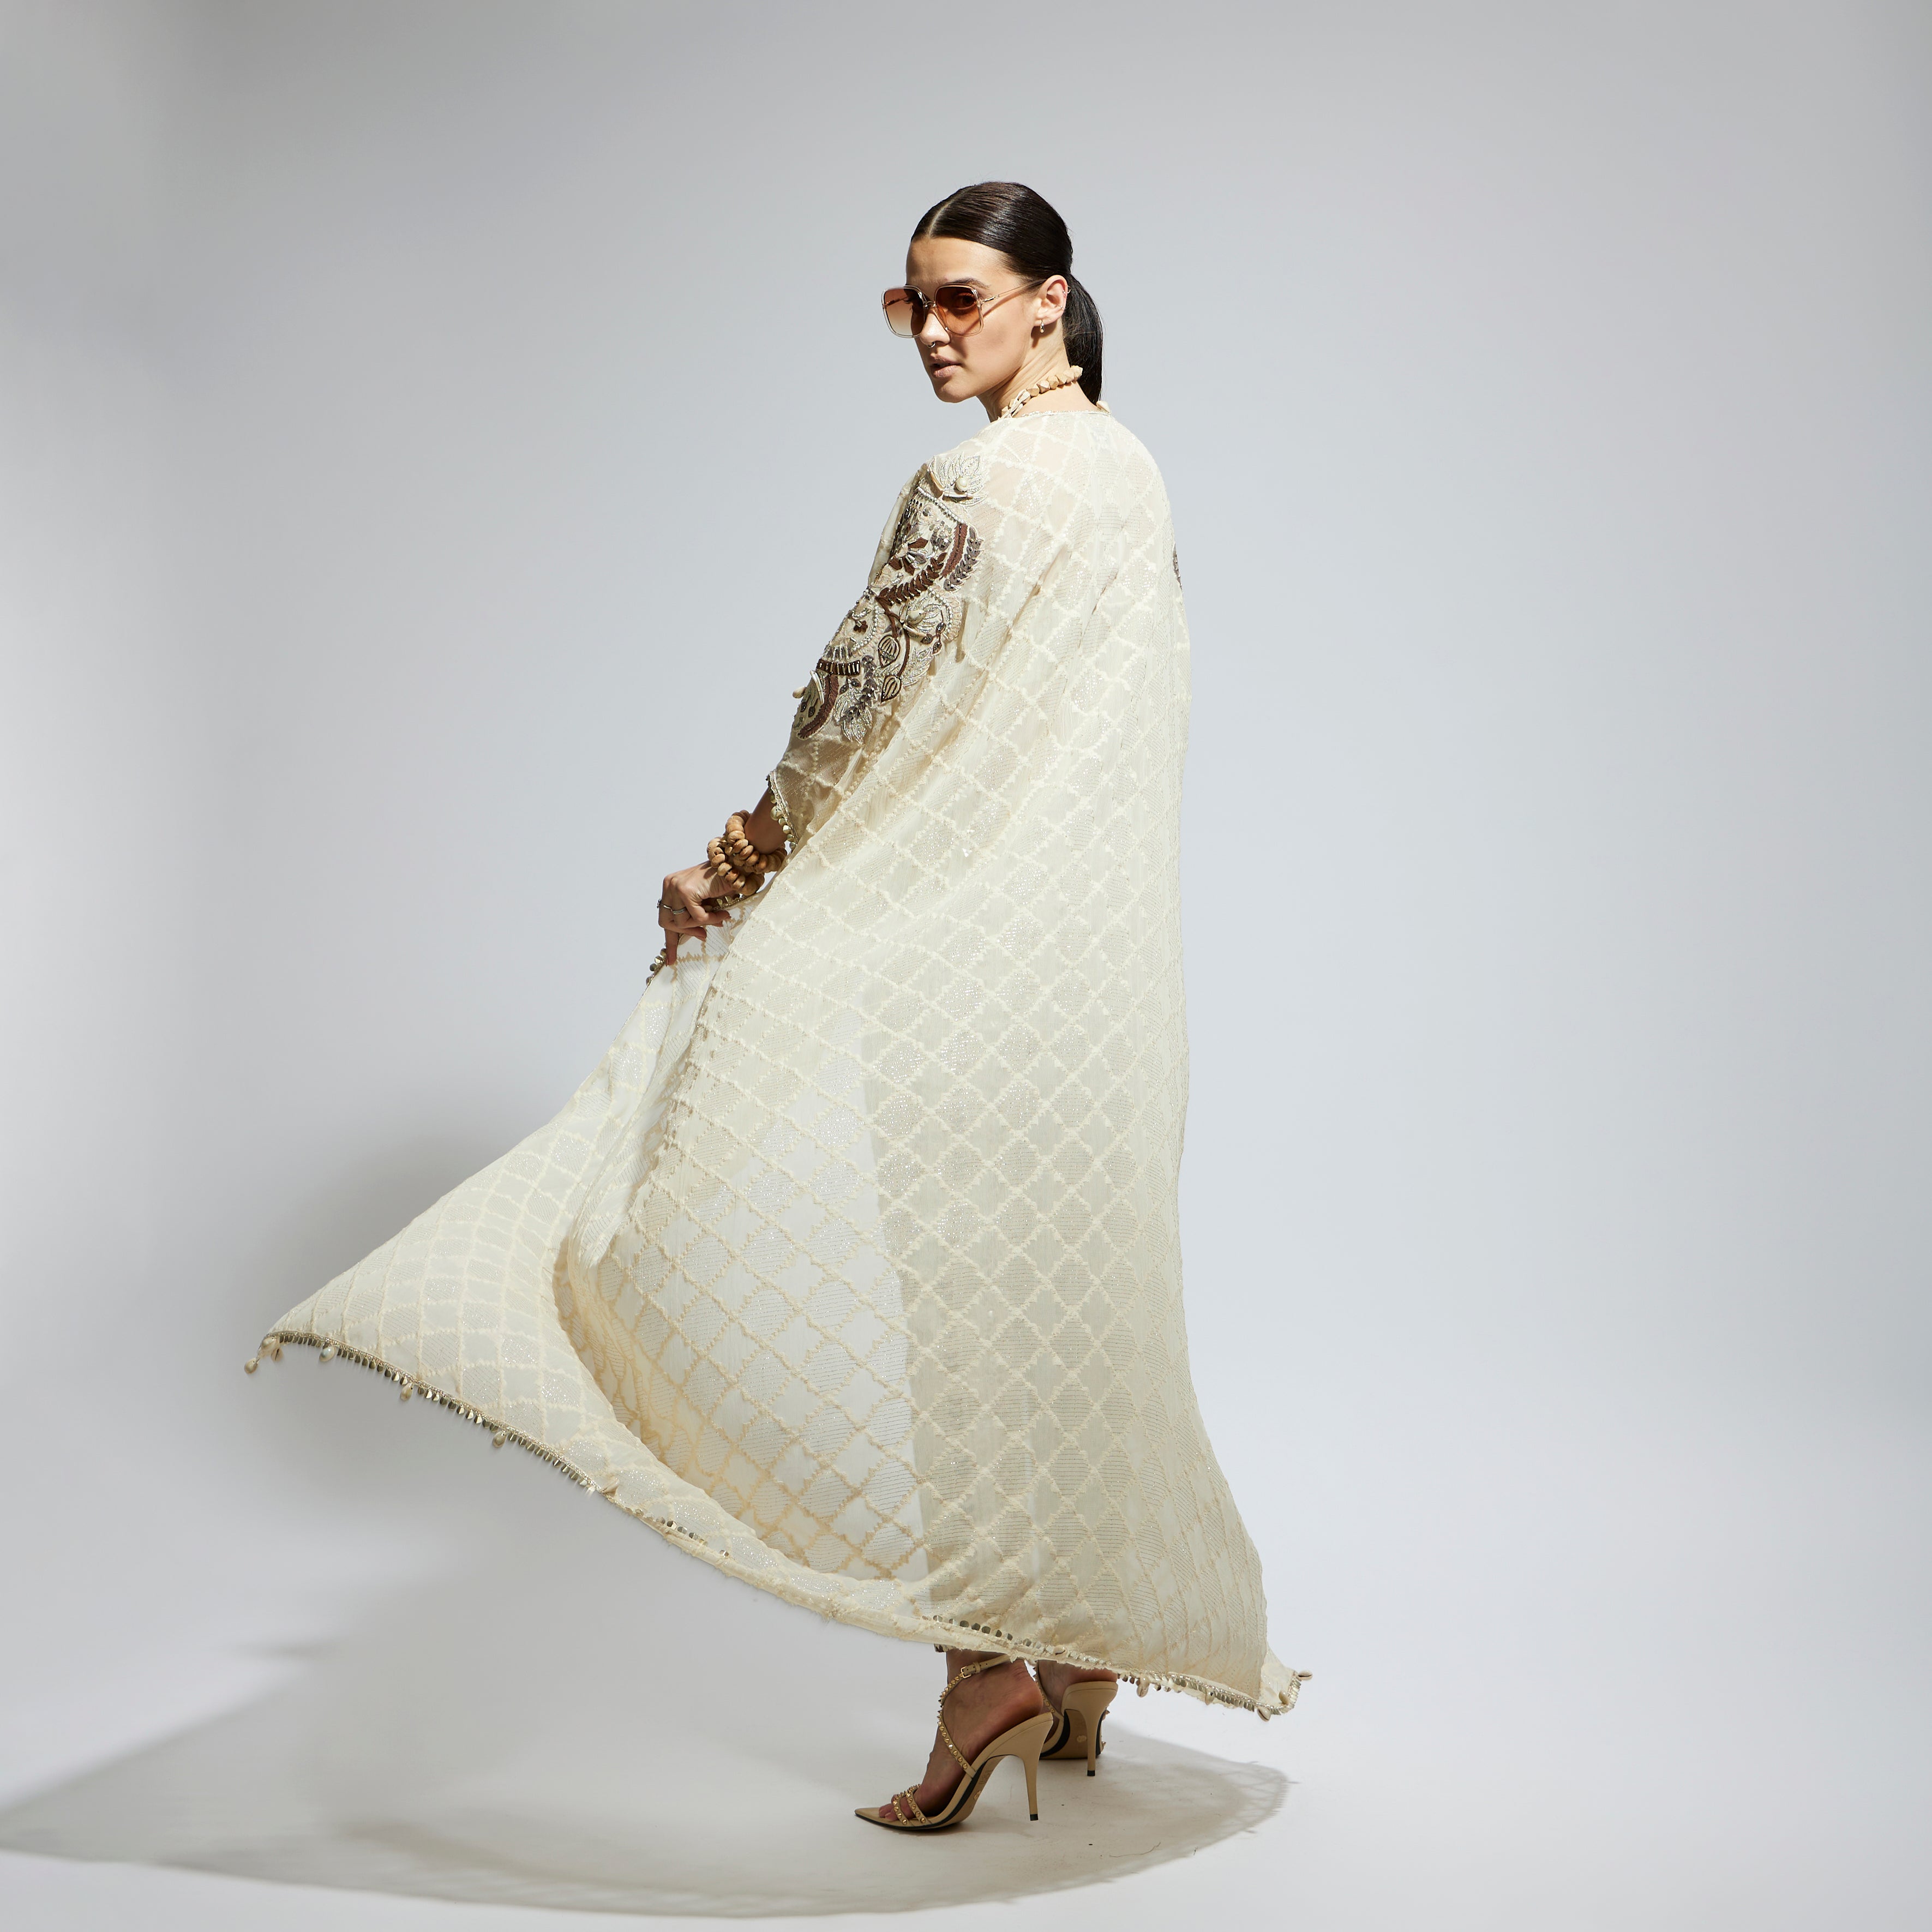 IVORY AZTEC EMBELLISHED CAPE PAIRED WITH HEAVILY EMBELLISHED BUSTIER AND PANTS